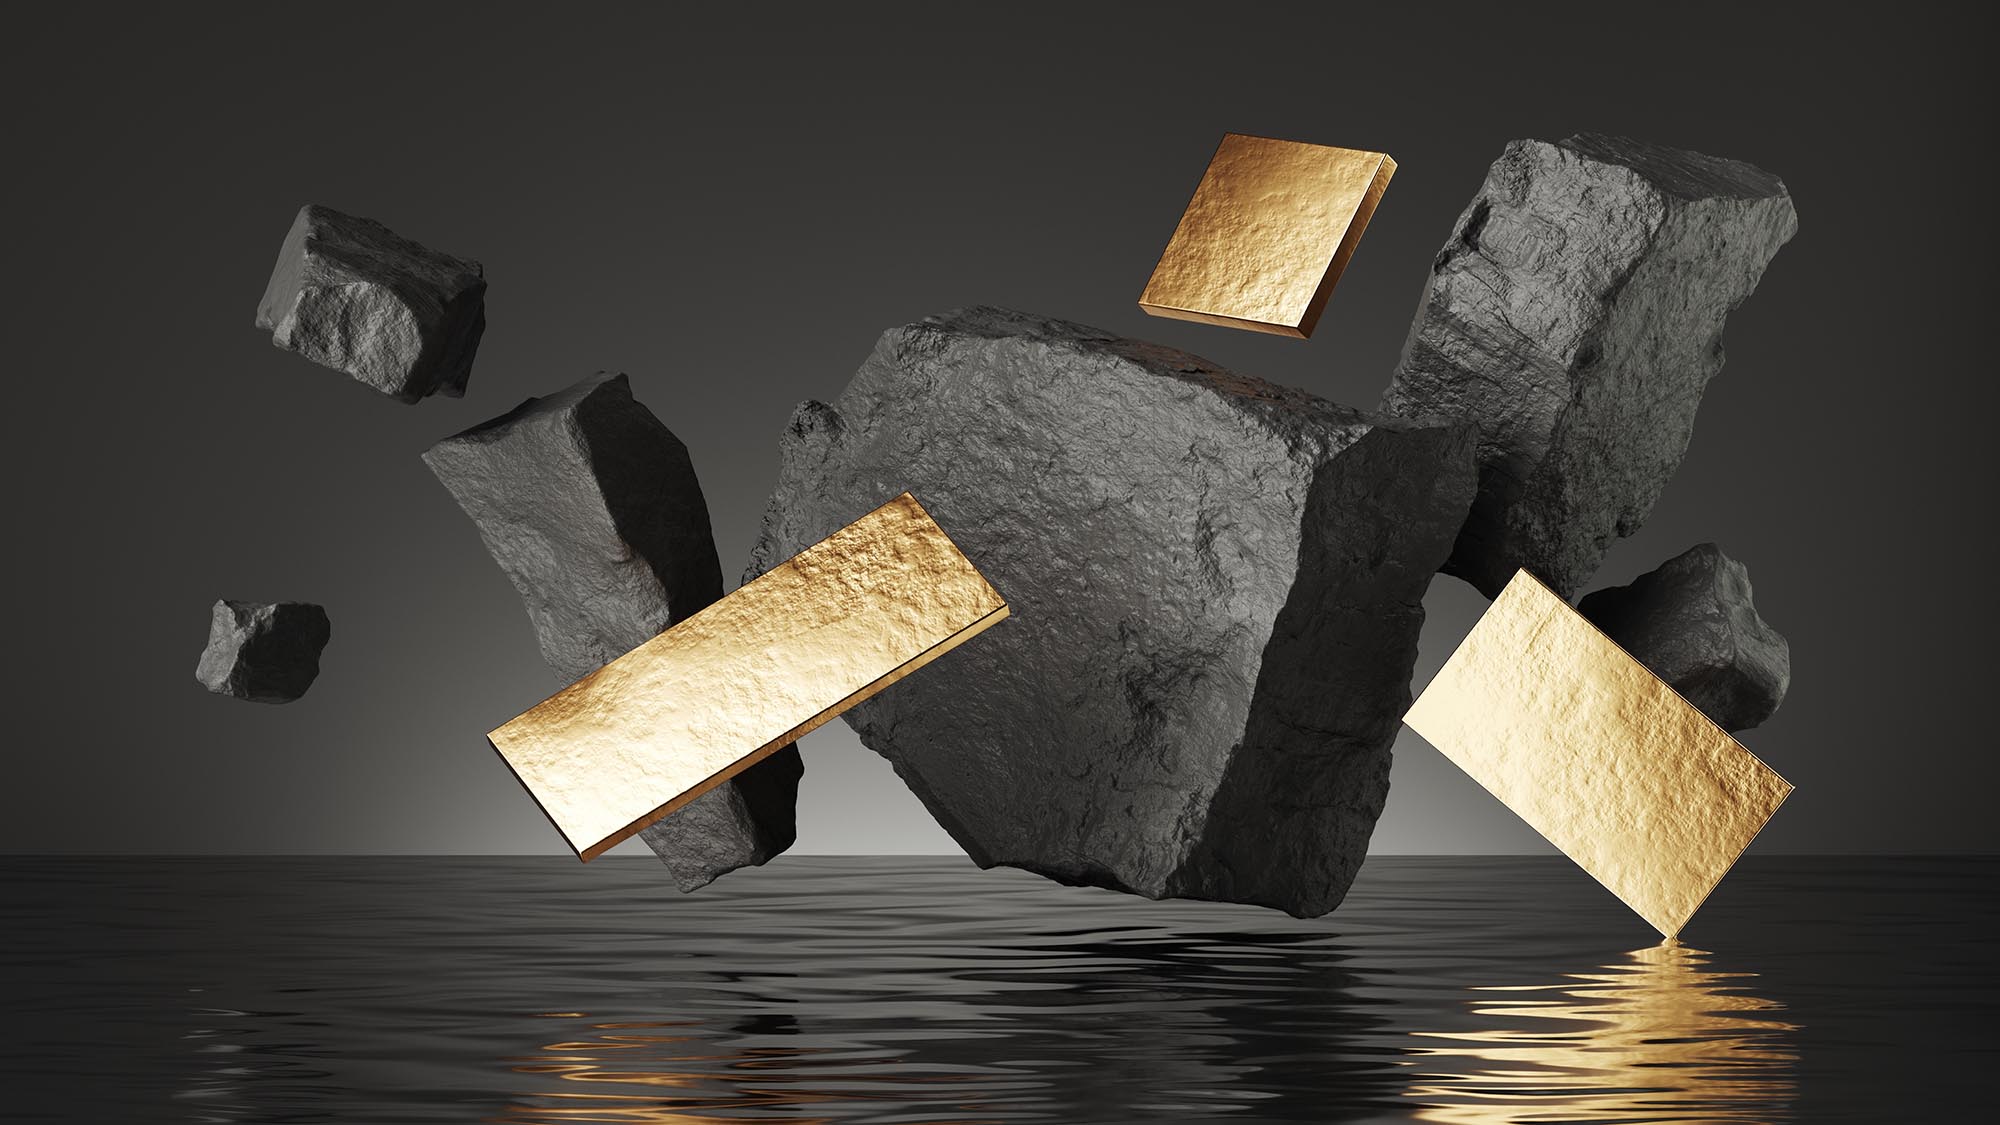 Gold geometric panels and black rocks levitate above the water with reflection